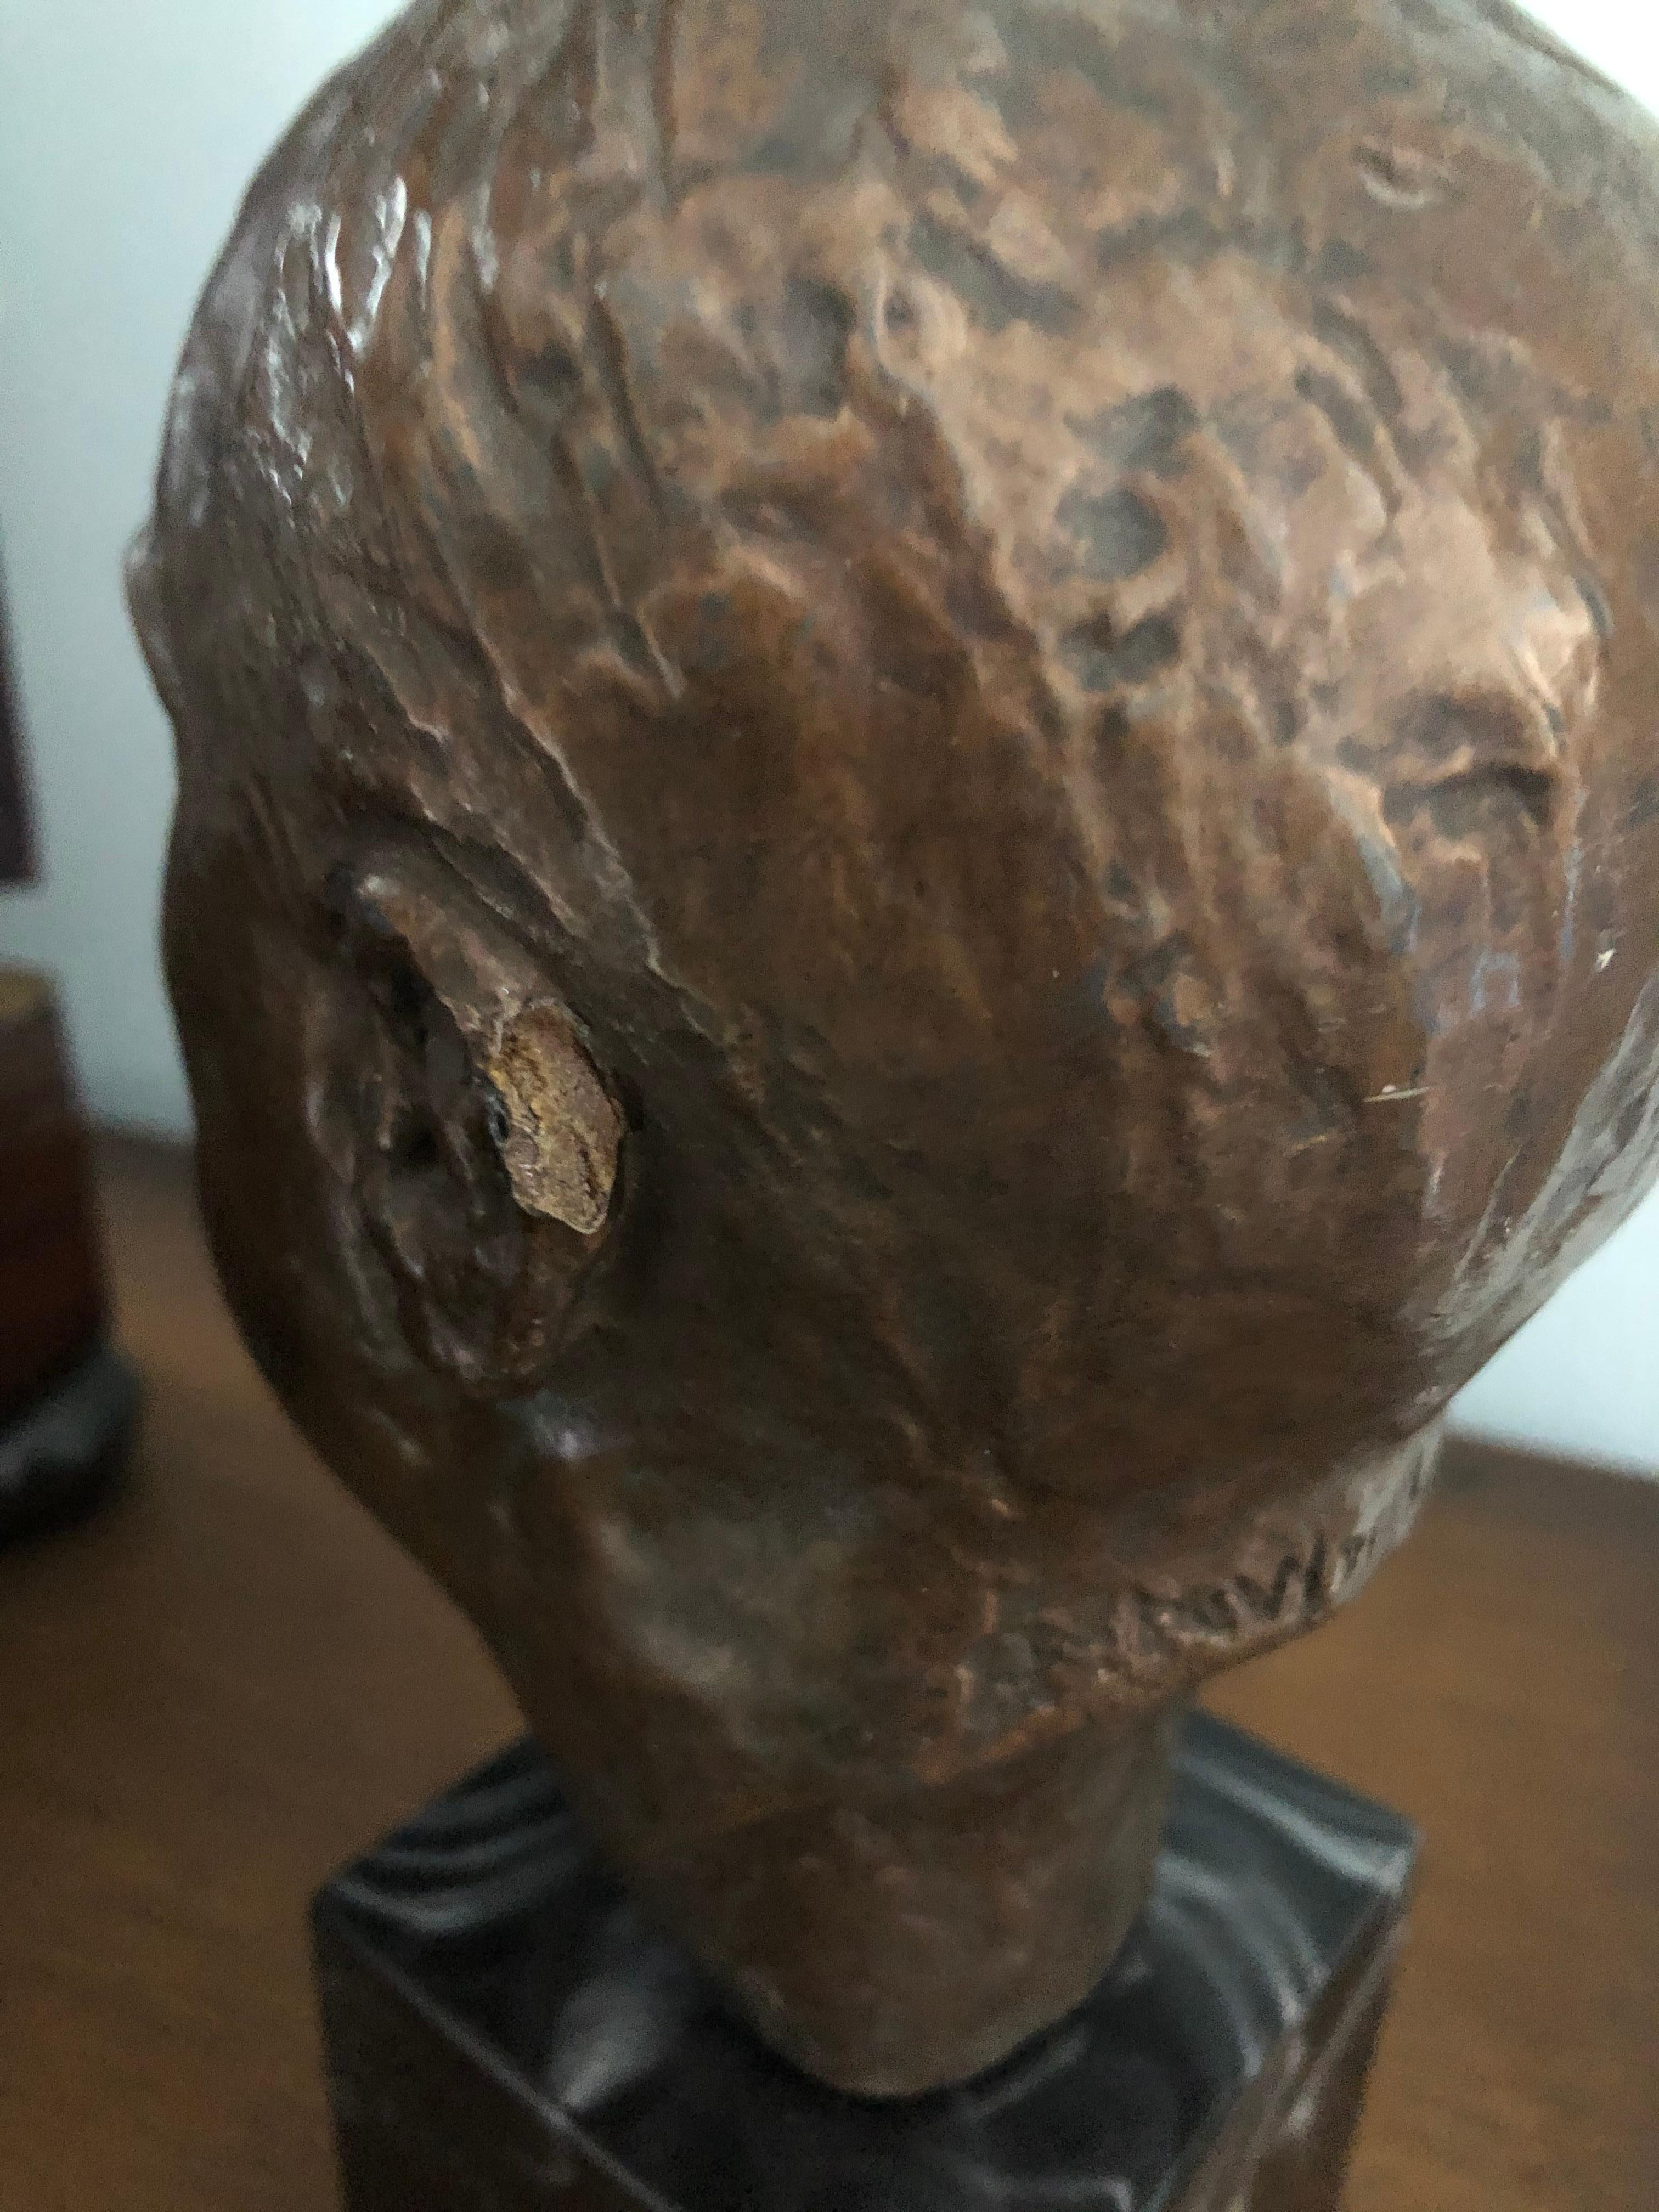 Jo Daviidson: 1883-1952. Well listed American Sculptor who has had auction results over $31,000. He has had results over $6000 for these FDR bronze editions. The bust itself measures approximately 6 1/2 inches high by 4 inches wide  by 5 inches